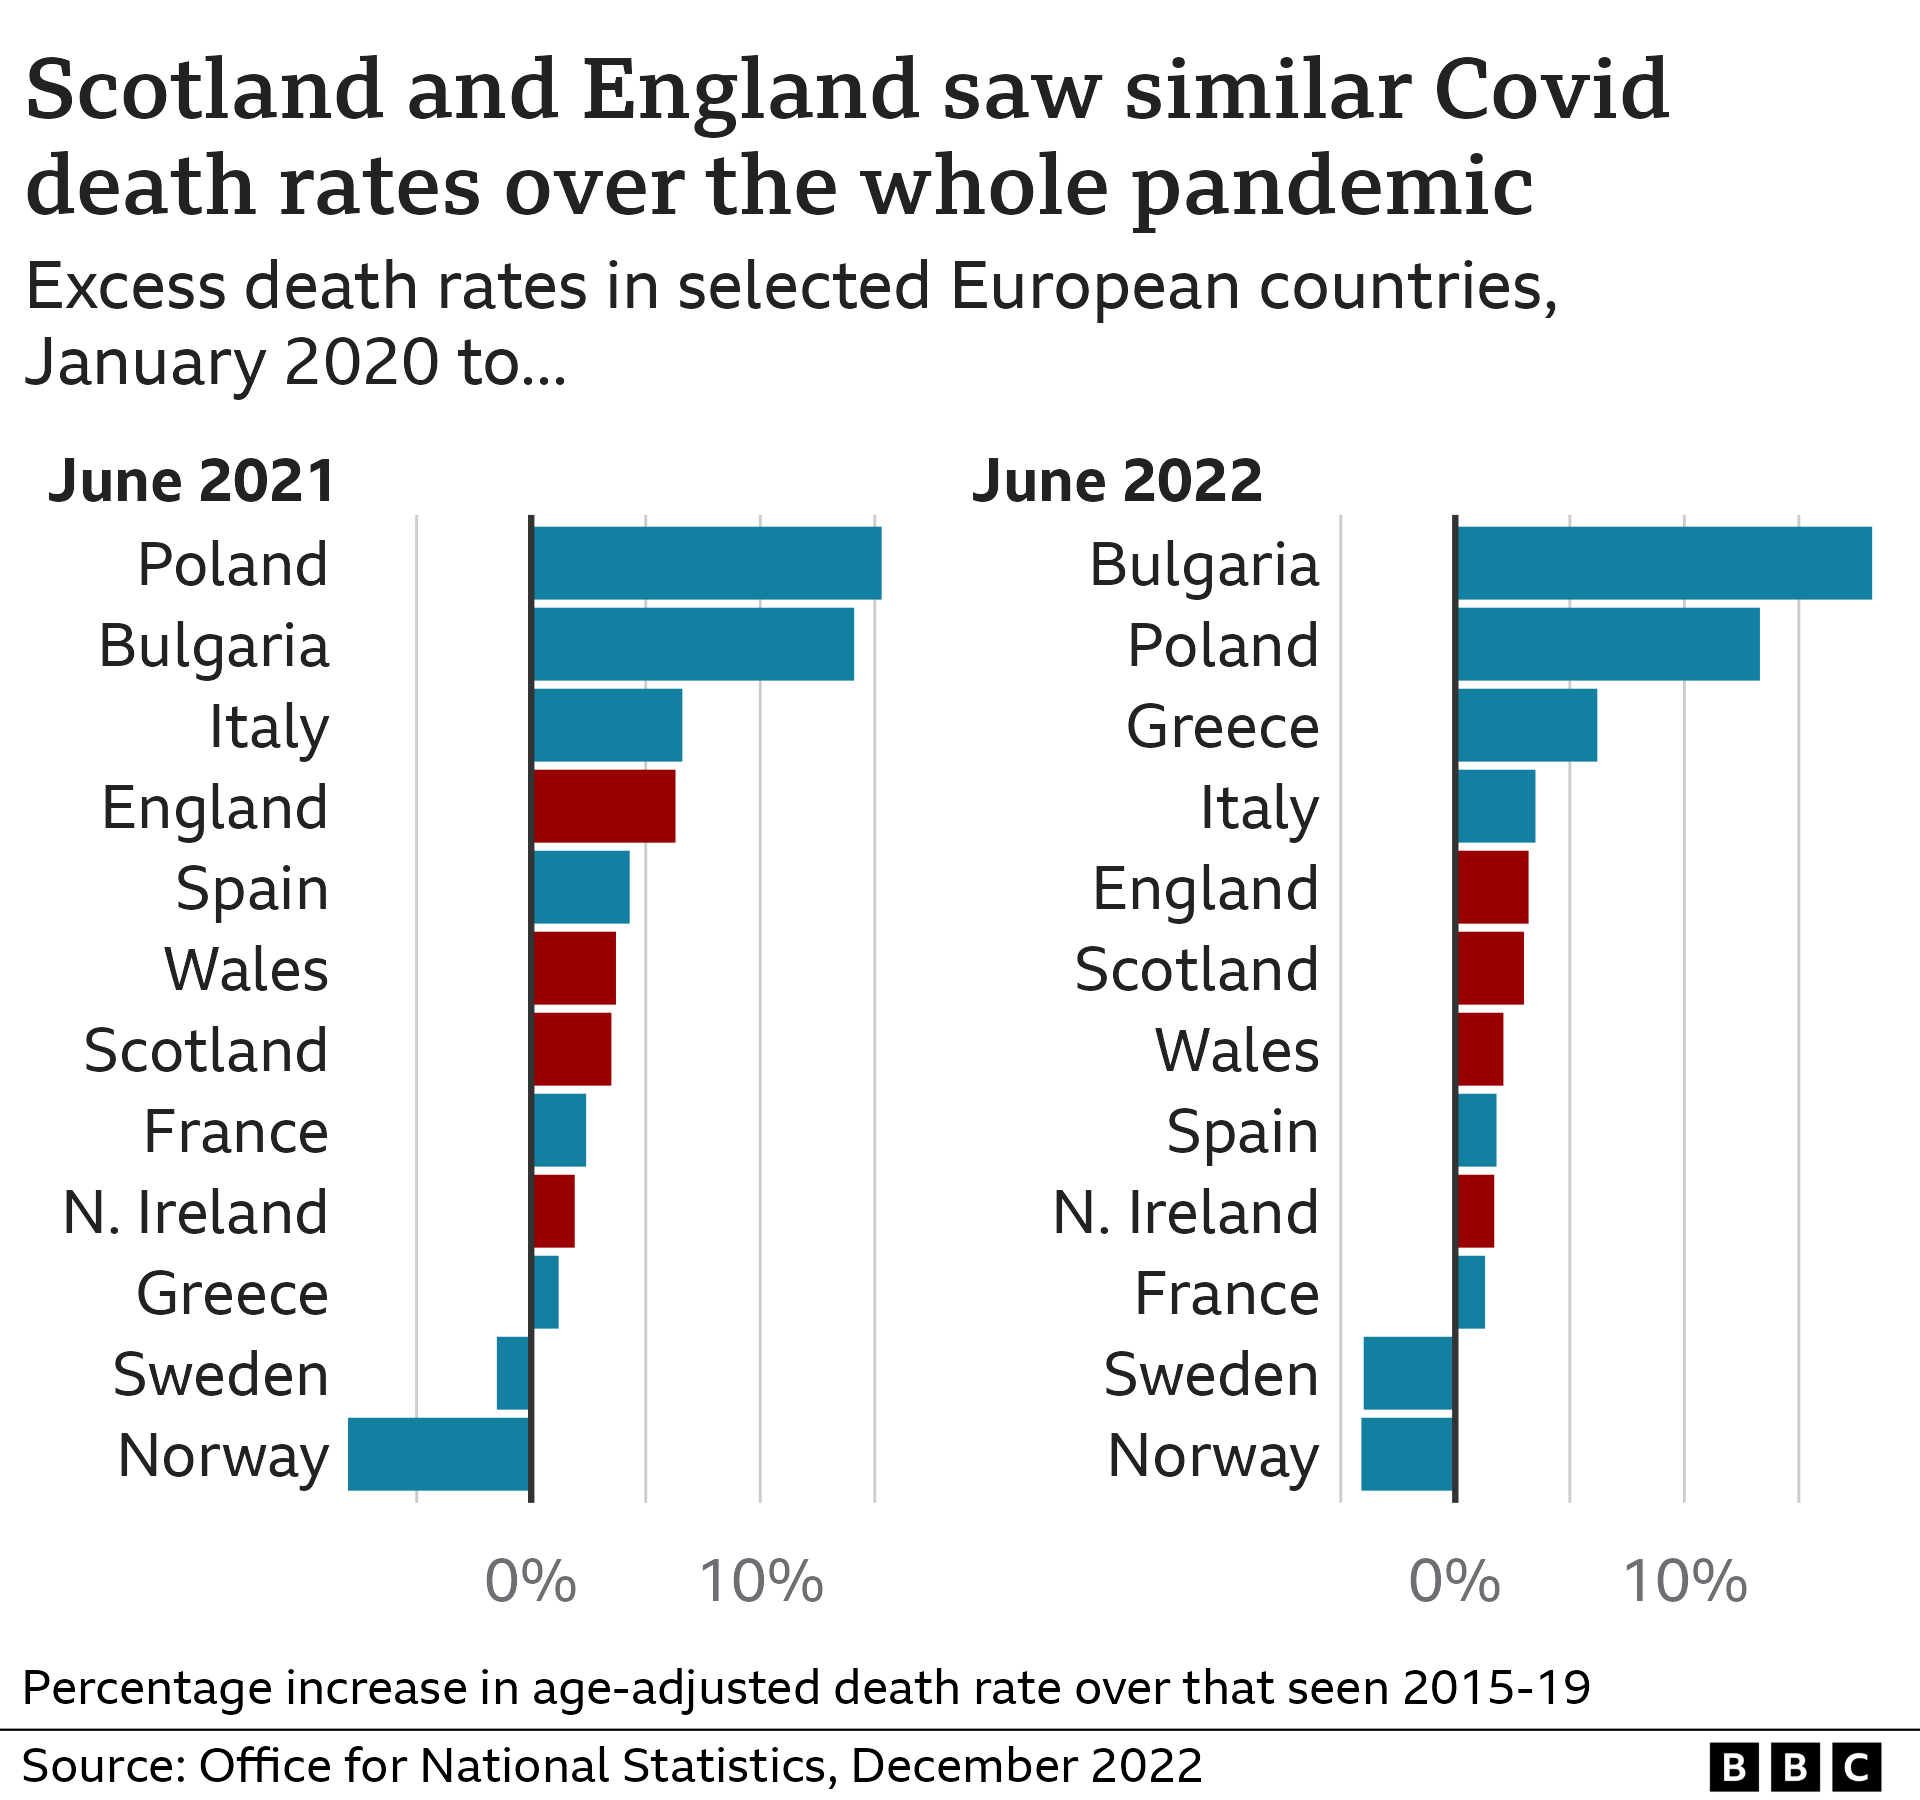 Chart showing how excess death rates in selected European countries compared in the first year of the pandemic compared with January 2020 to June 2022 overall